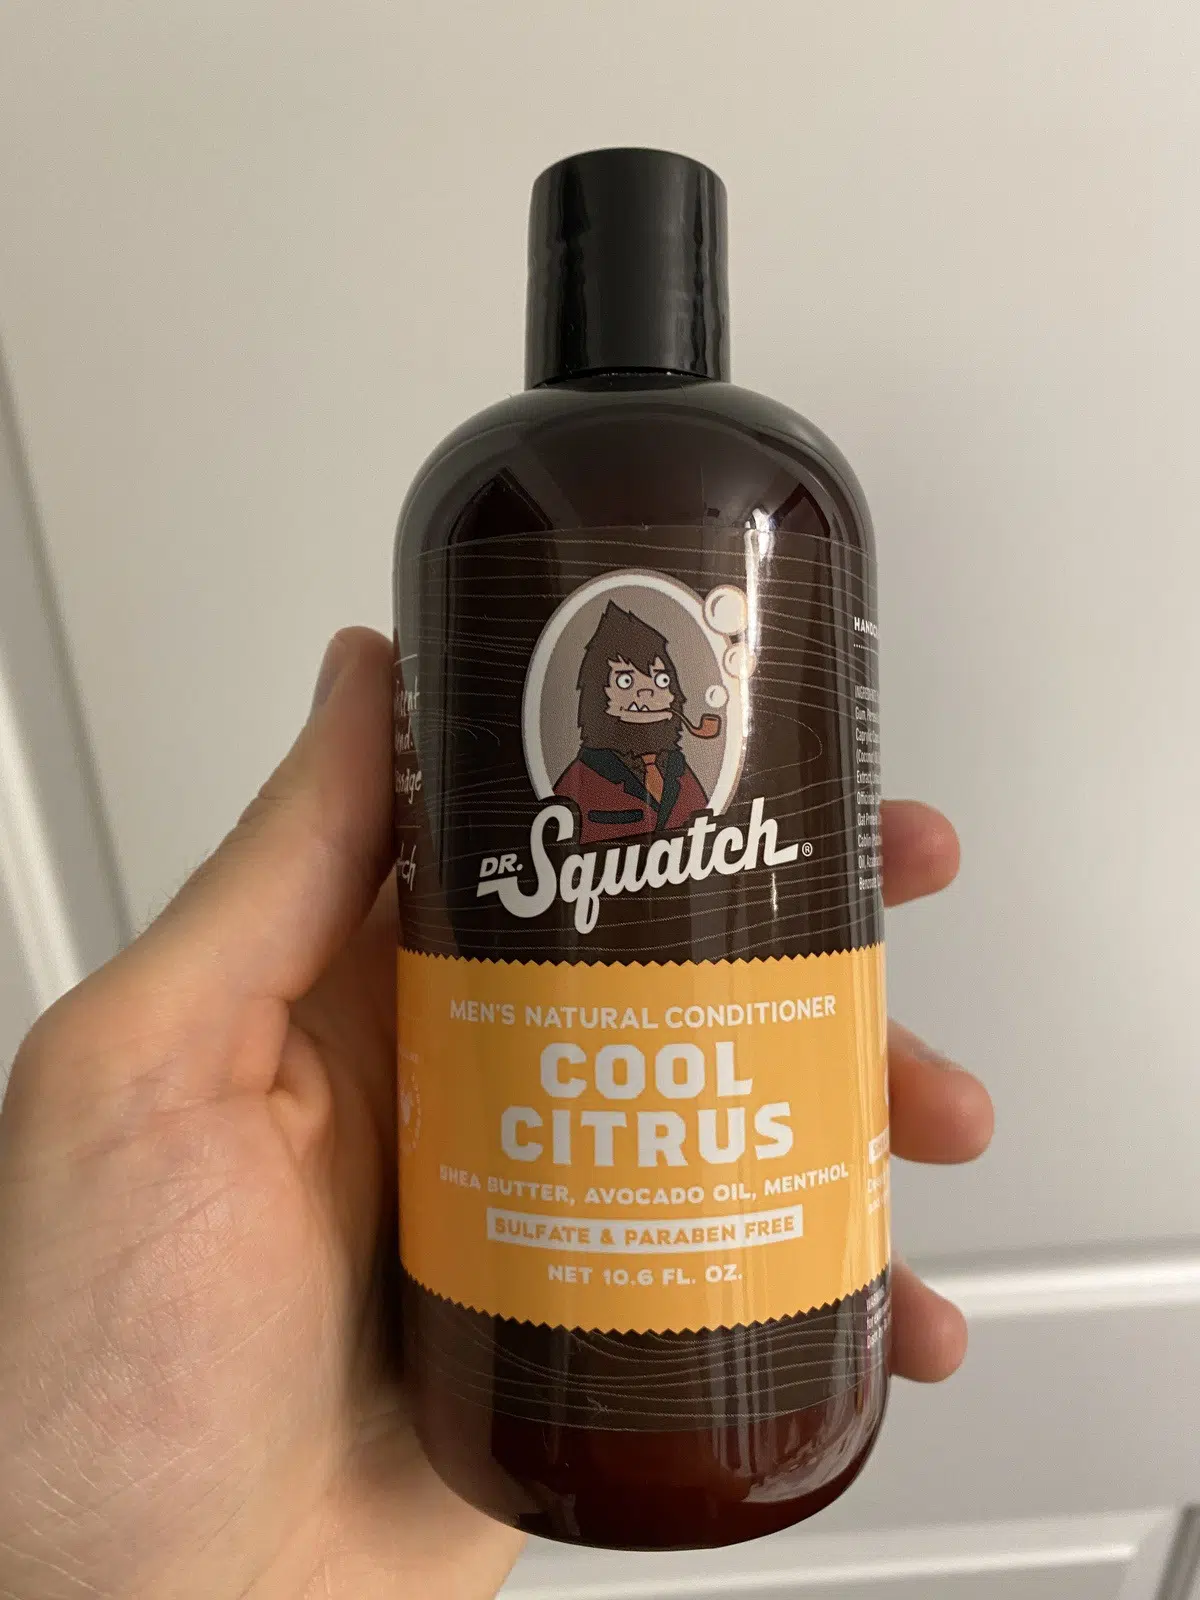 An Honest Dr. Squatch Review: Read This before Buying - TMM